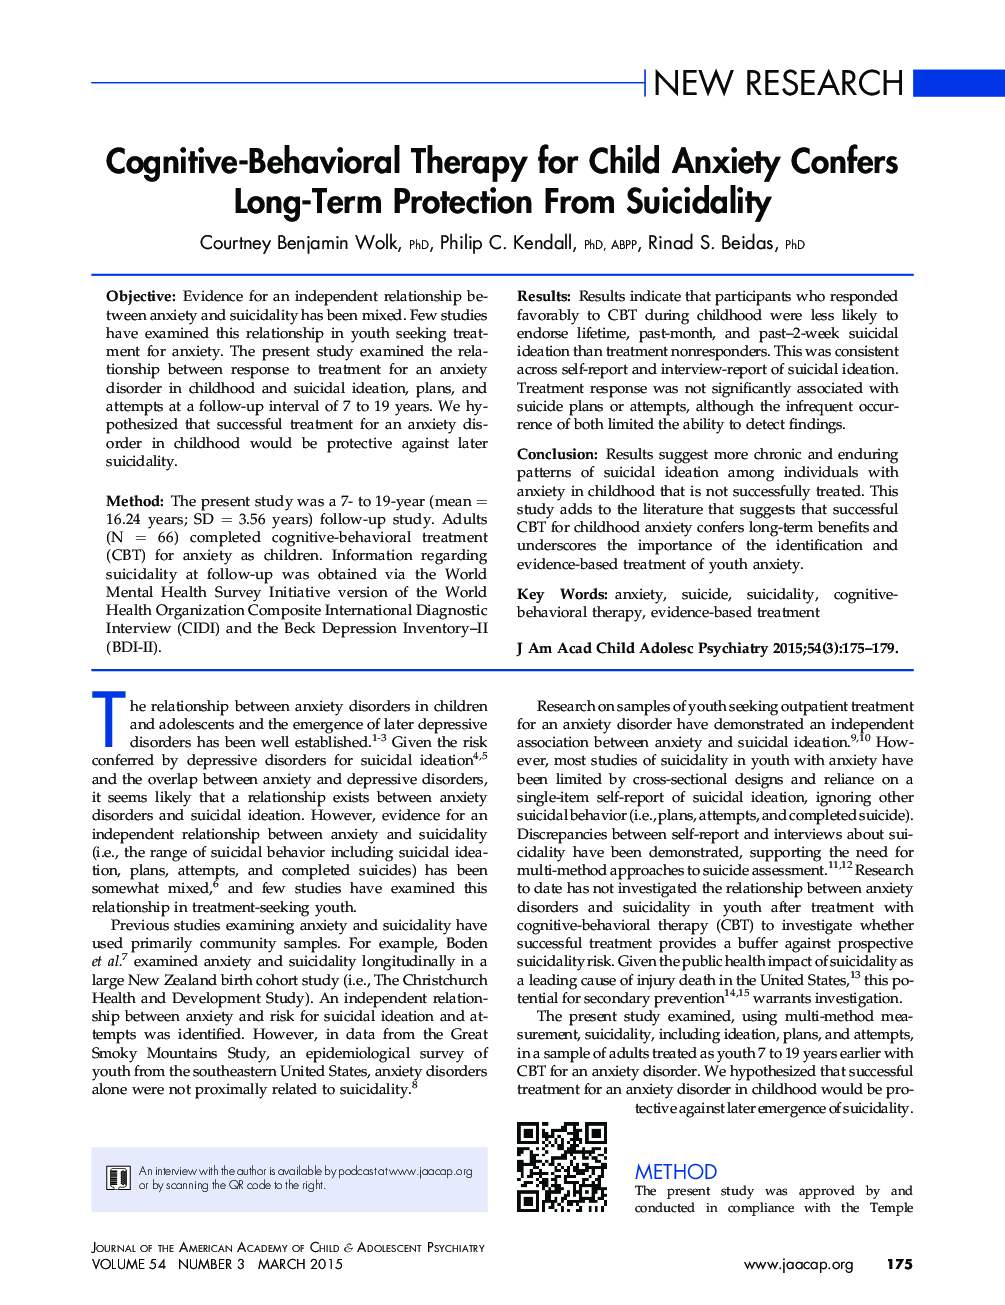 Cognitive-Behavioral Therapy for Child Anxiety Confers Long-Term Protection From Suicidality